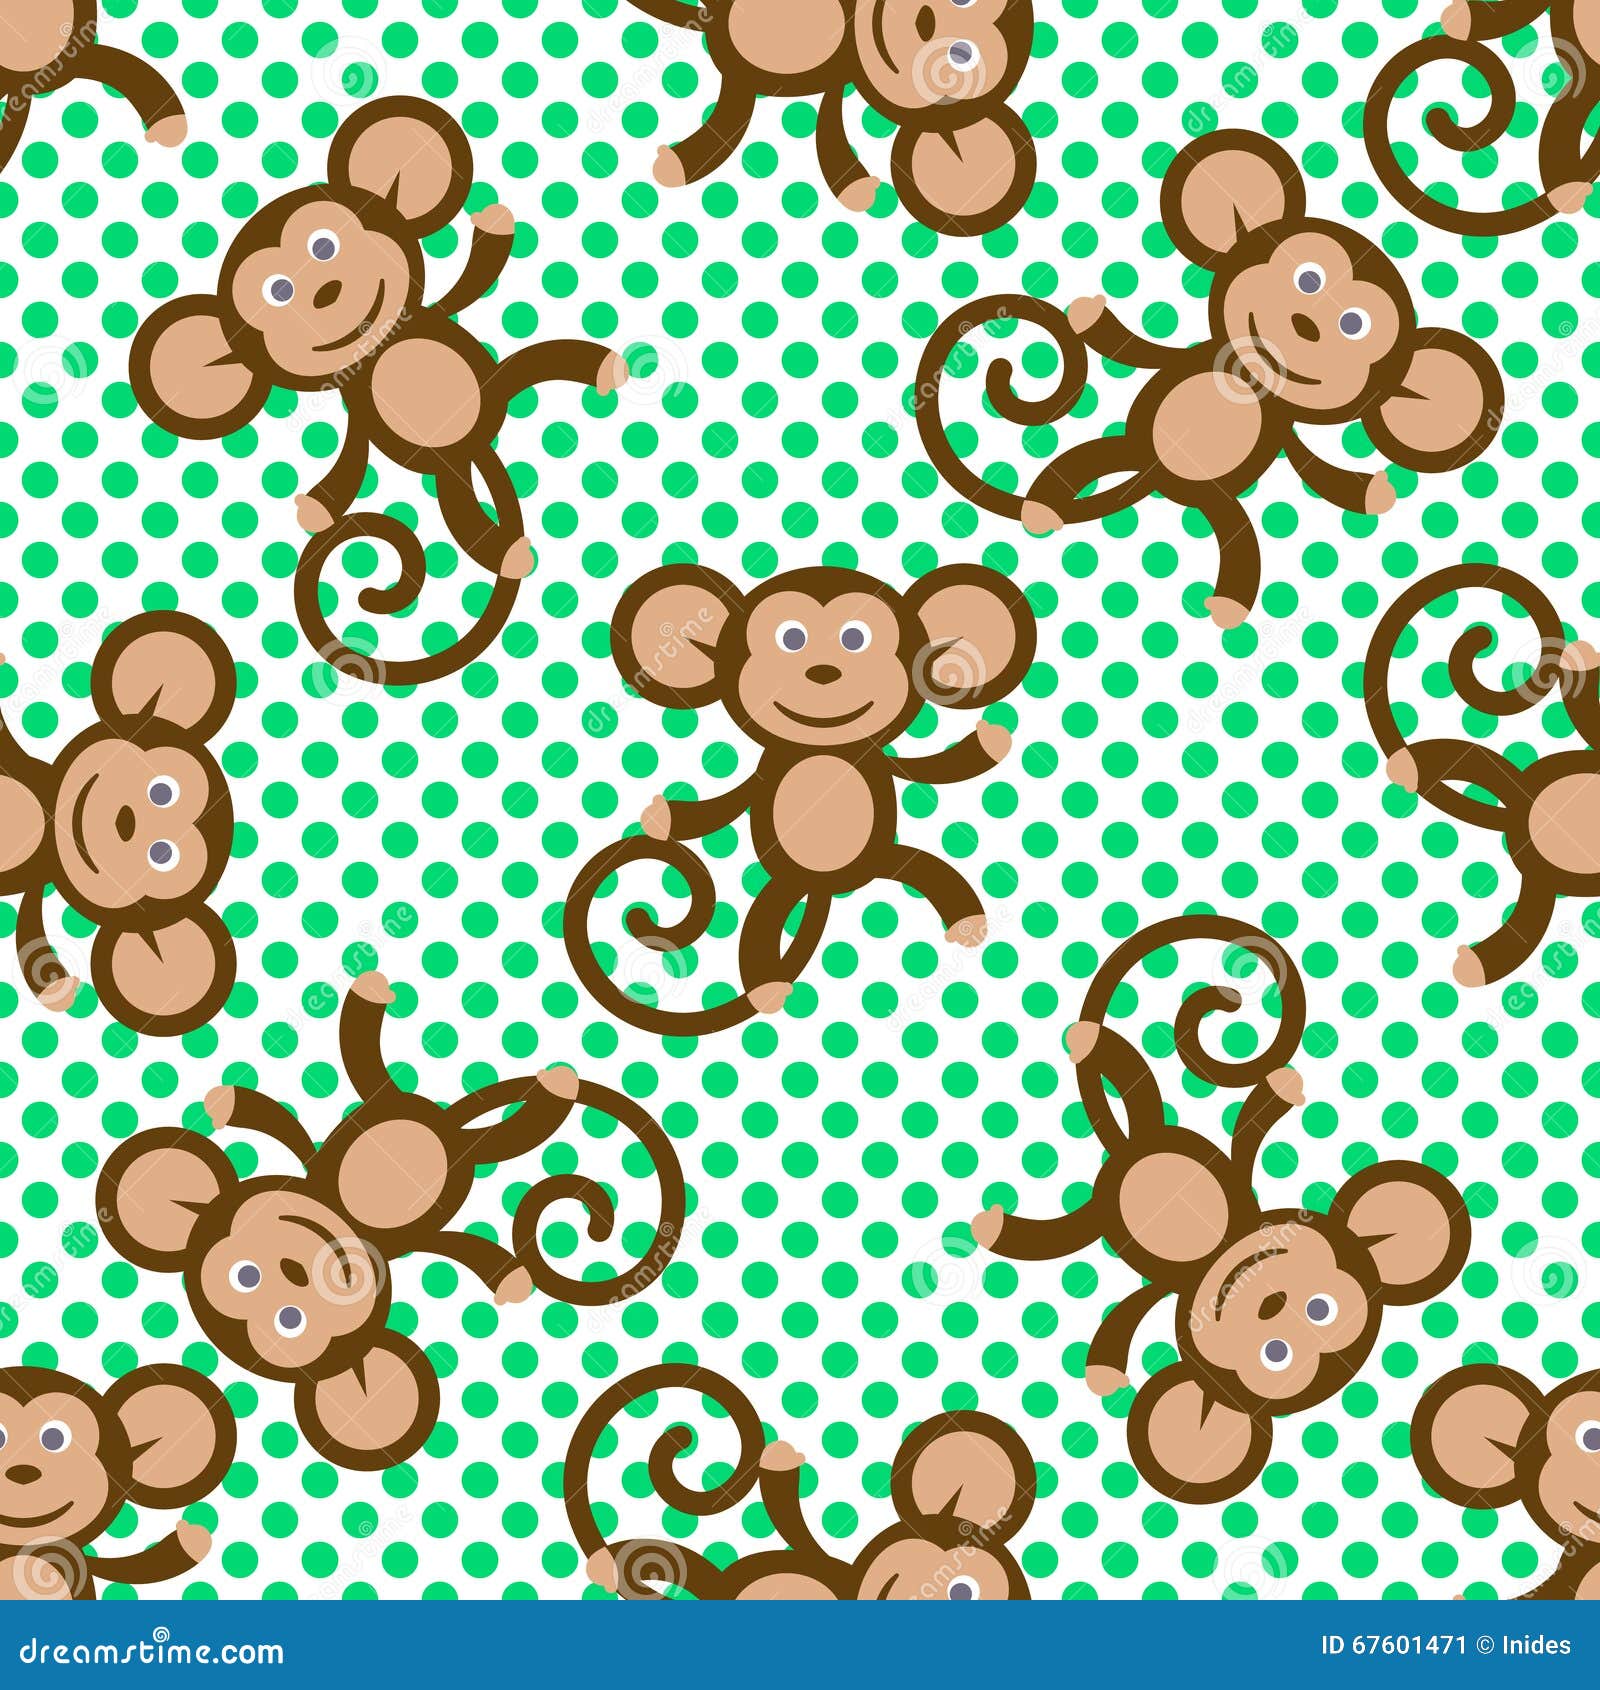 Monkey Kid Seamless Vector Pattern for Textile Print. Stock Vector ...